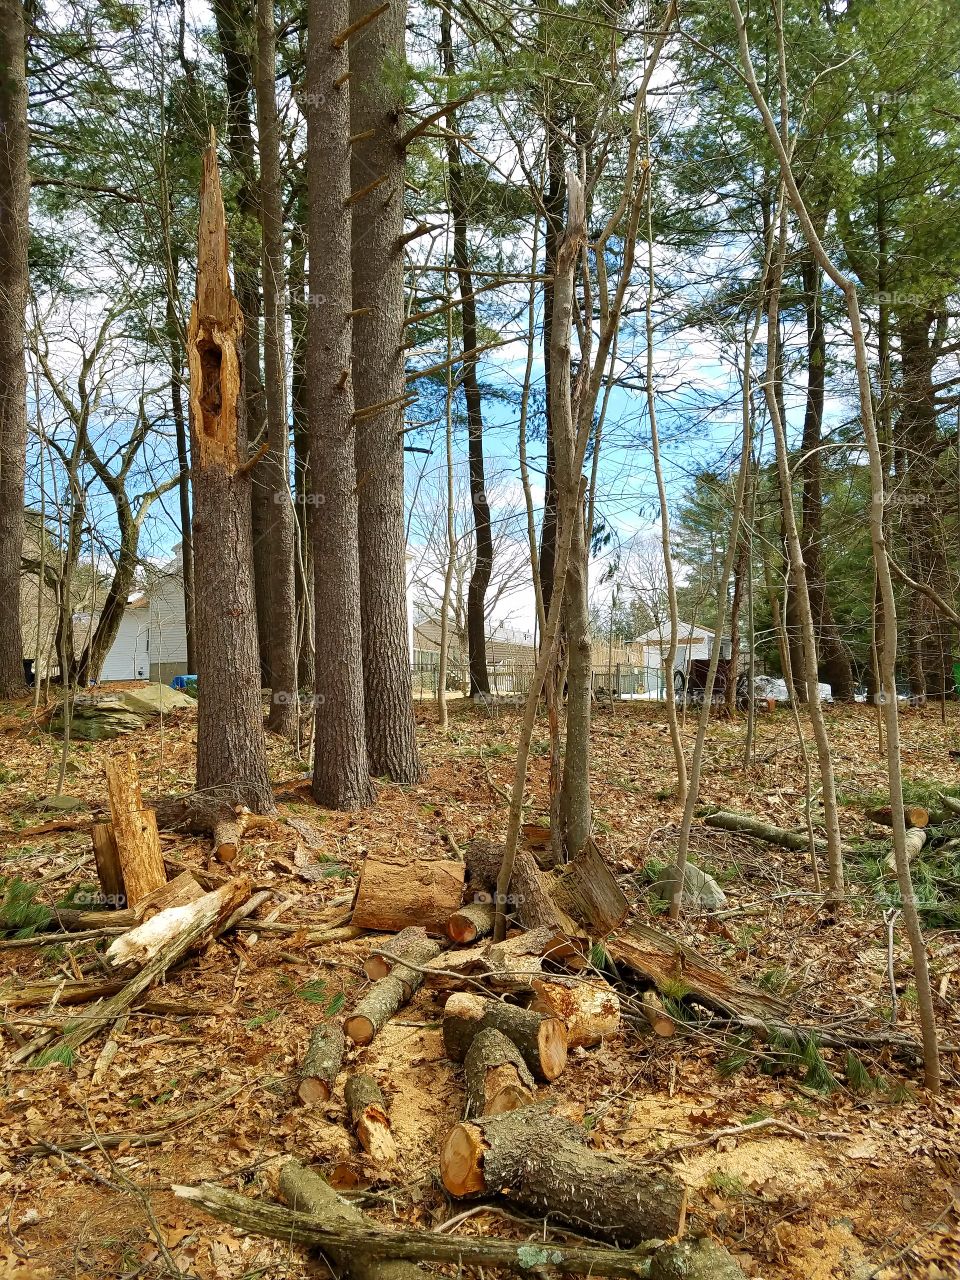 Pine grove showing stump of tree broken from winter storms, chainsaw clearing has started cutting wood into pieces & stacking to clear the grove. Blue sky is showing through the woods, pretty.